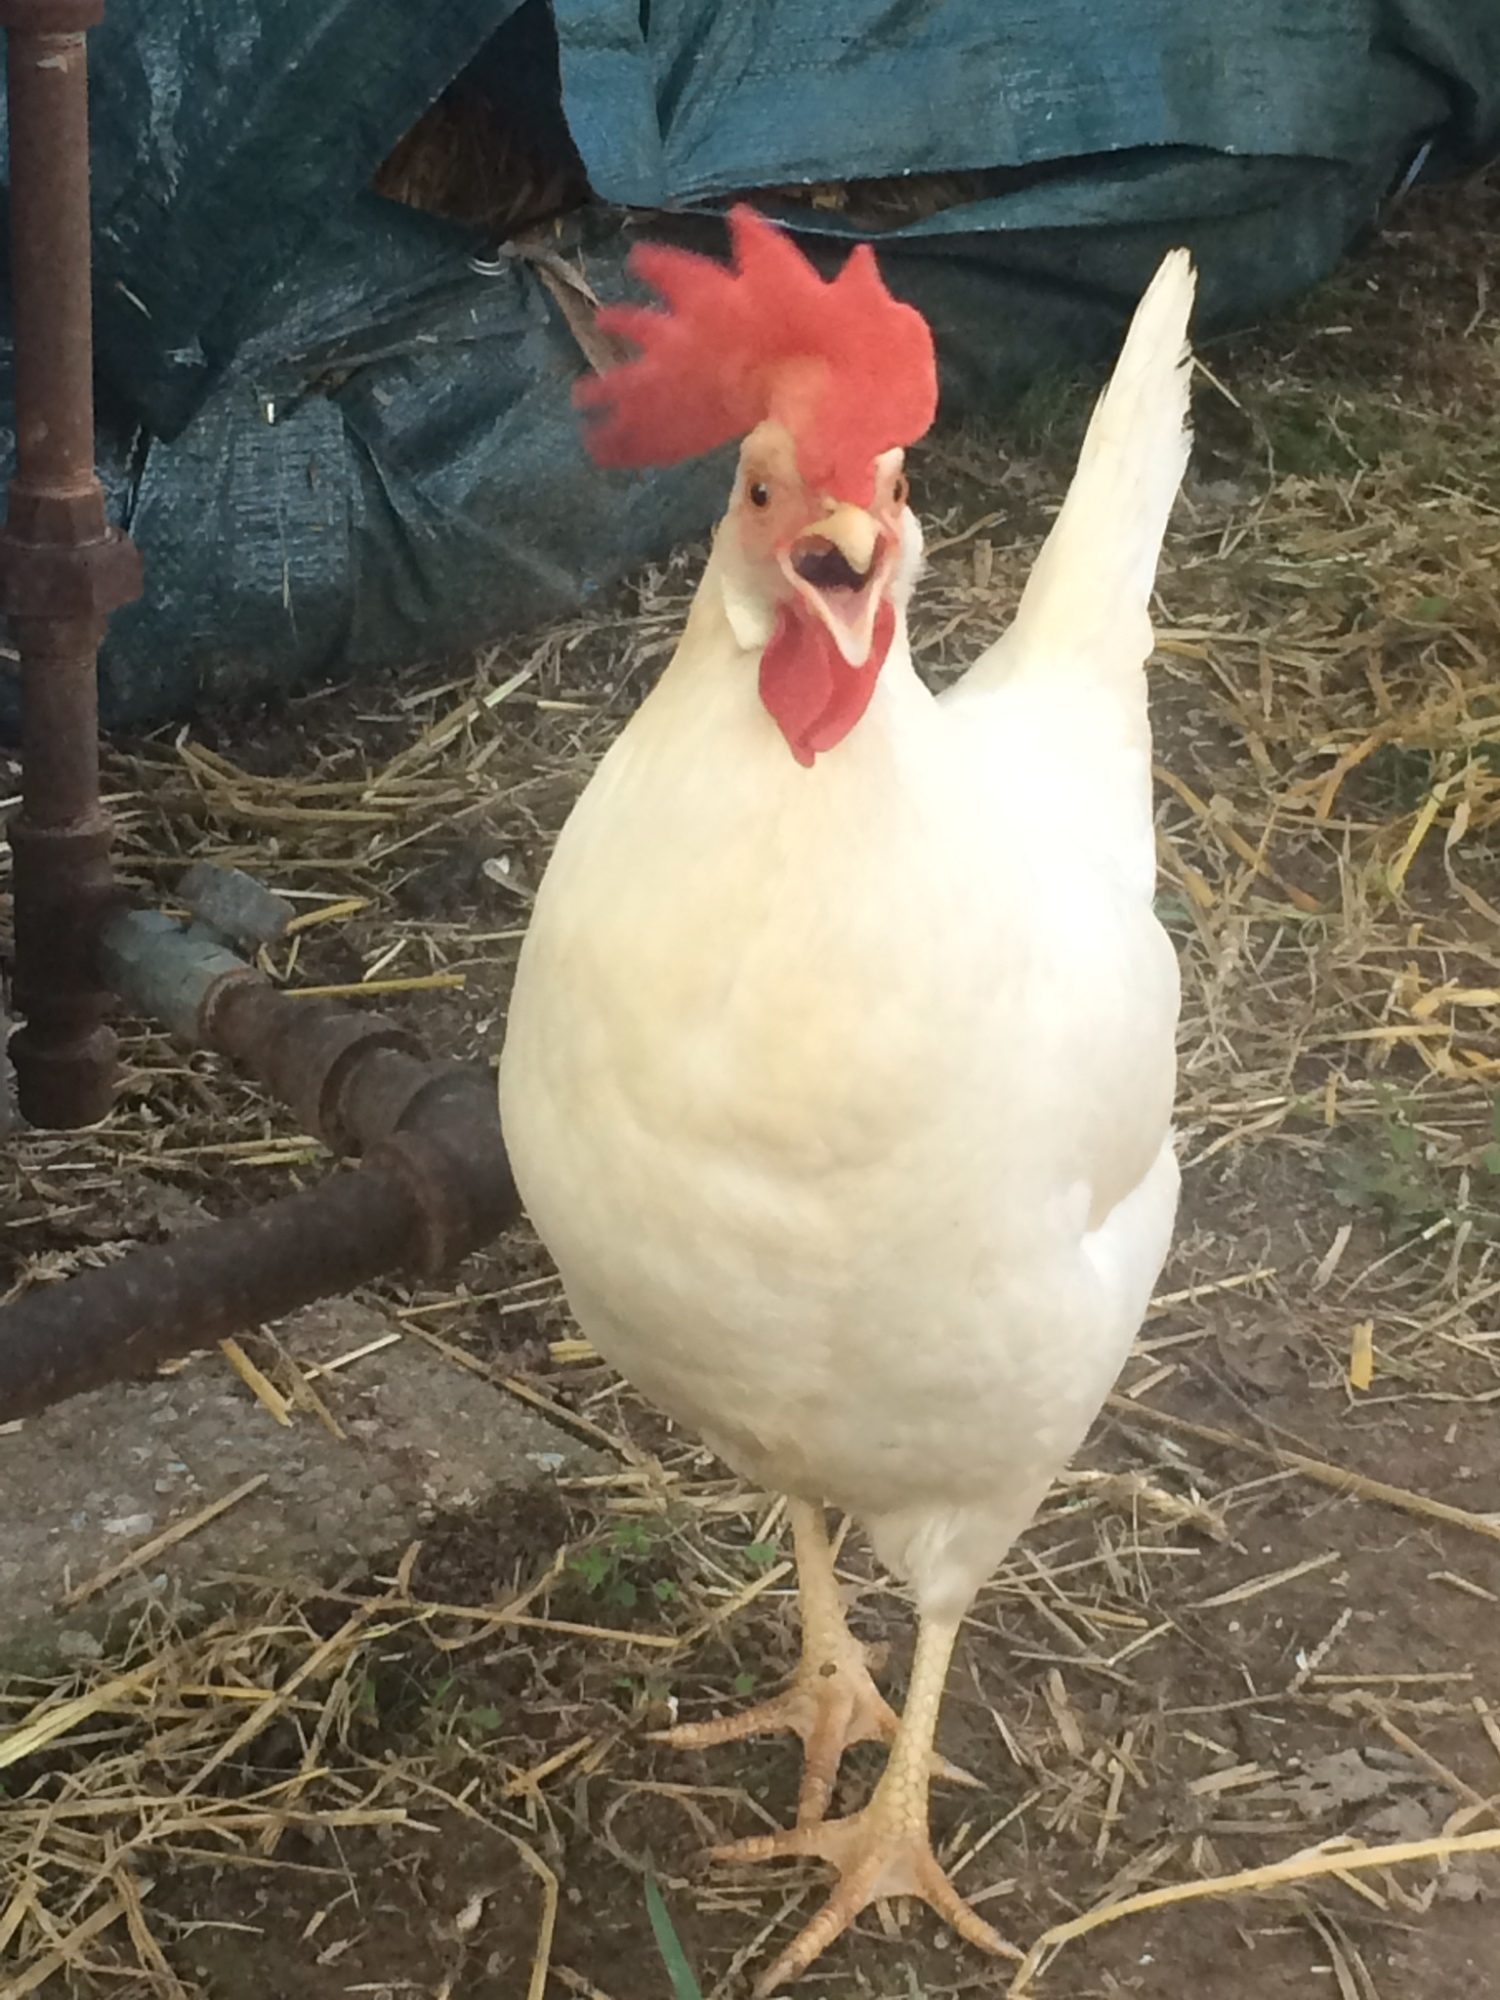 White Leghorn - Lucille
White eggs
Fearless of dog and cat. Perches on top of coop. Feed and scraps hog. 
Very personable and working on her asylum.